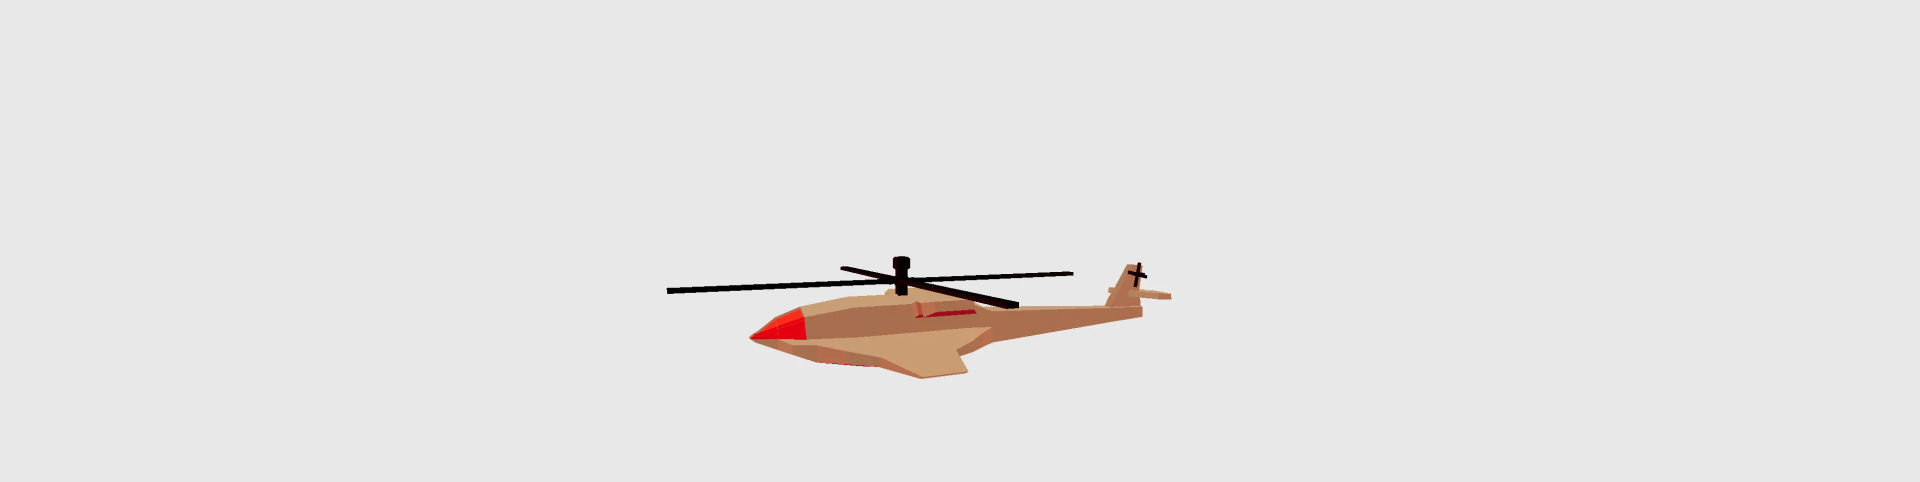 helicopter.fbx